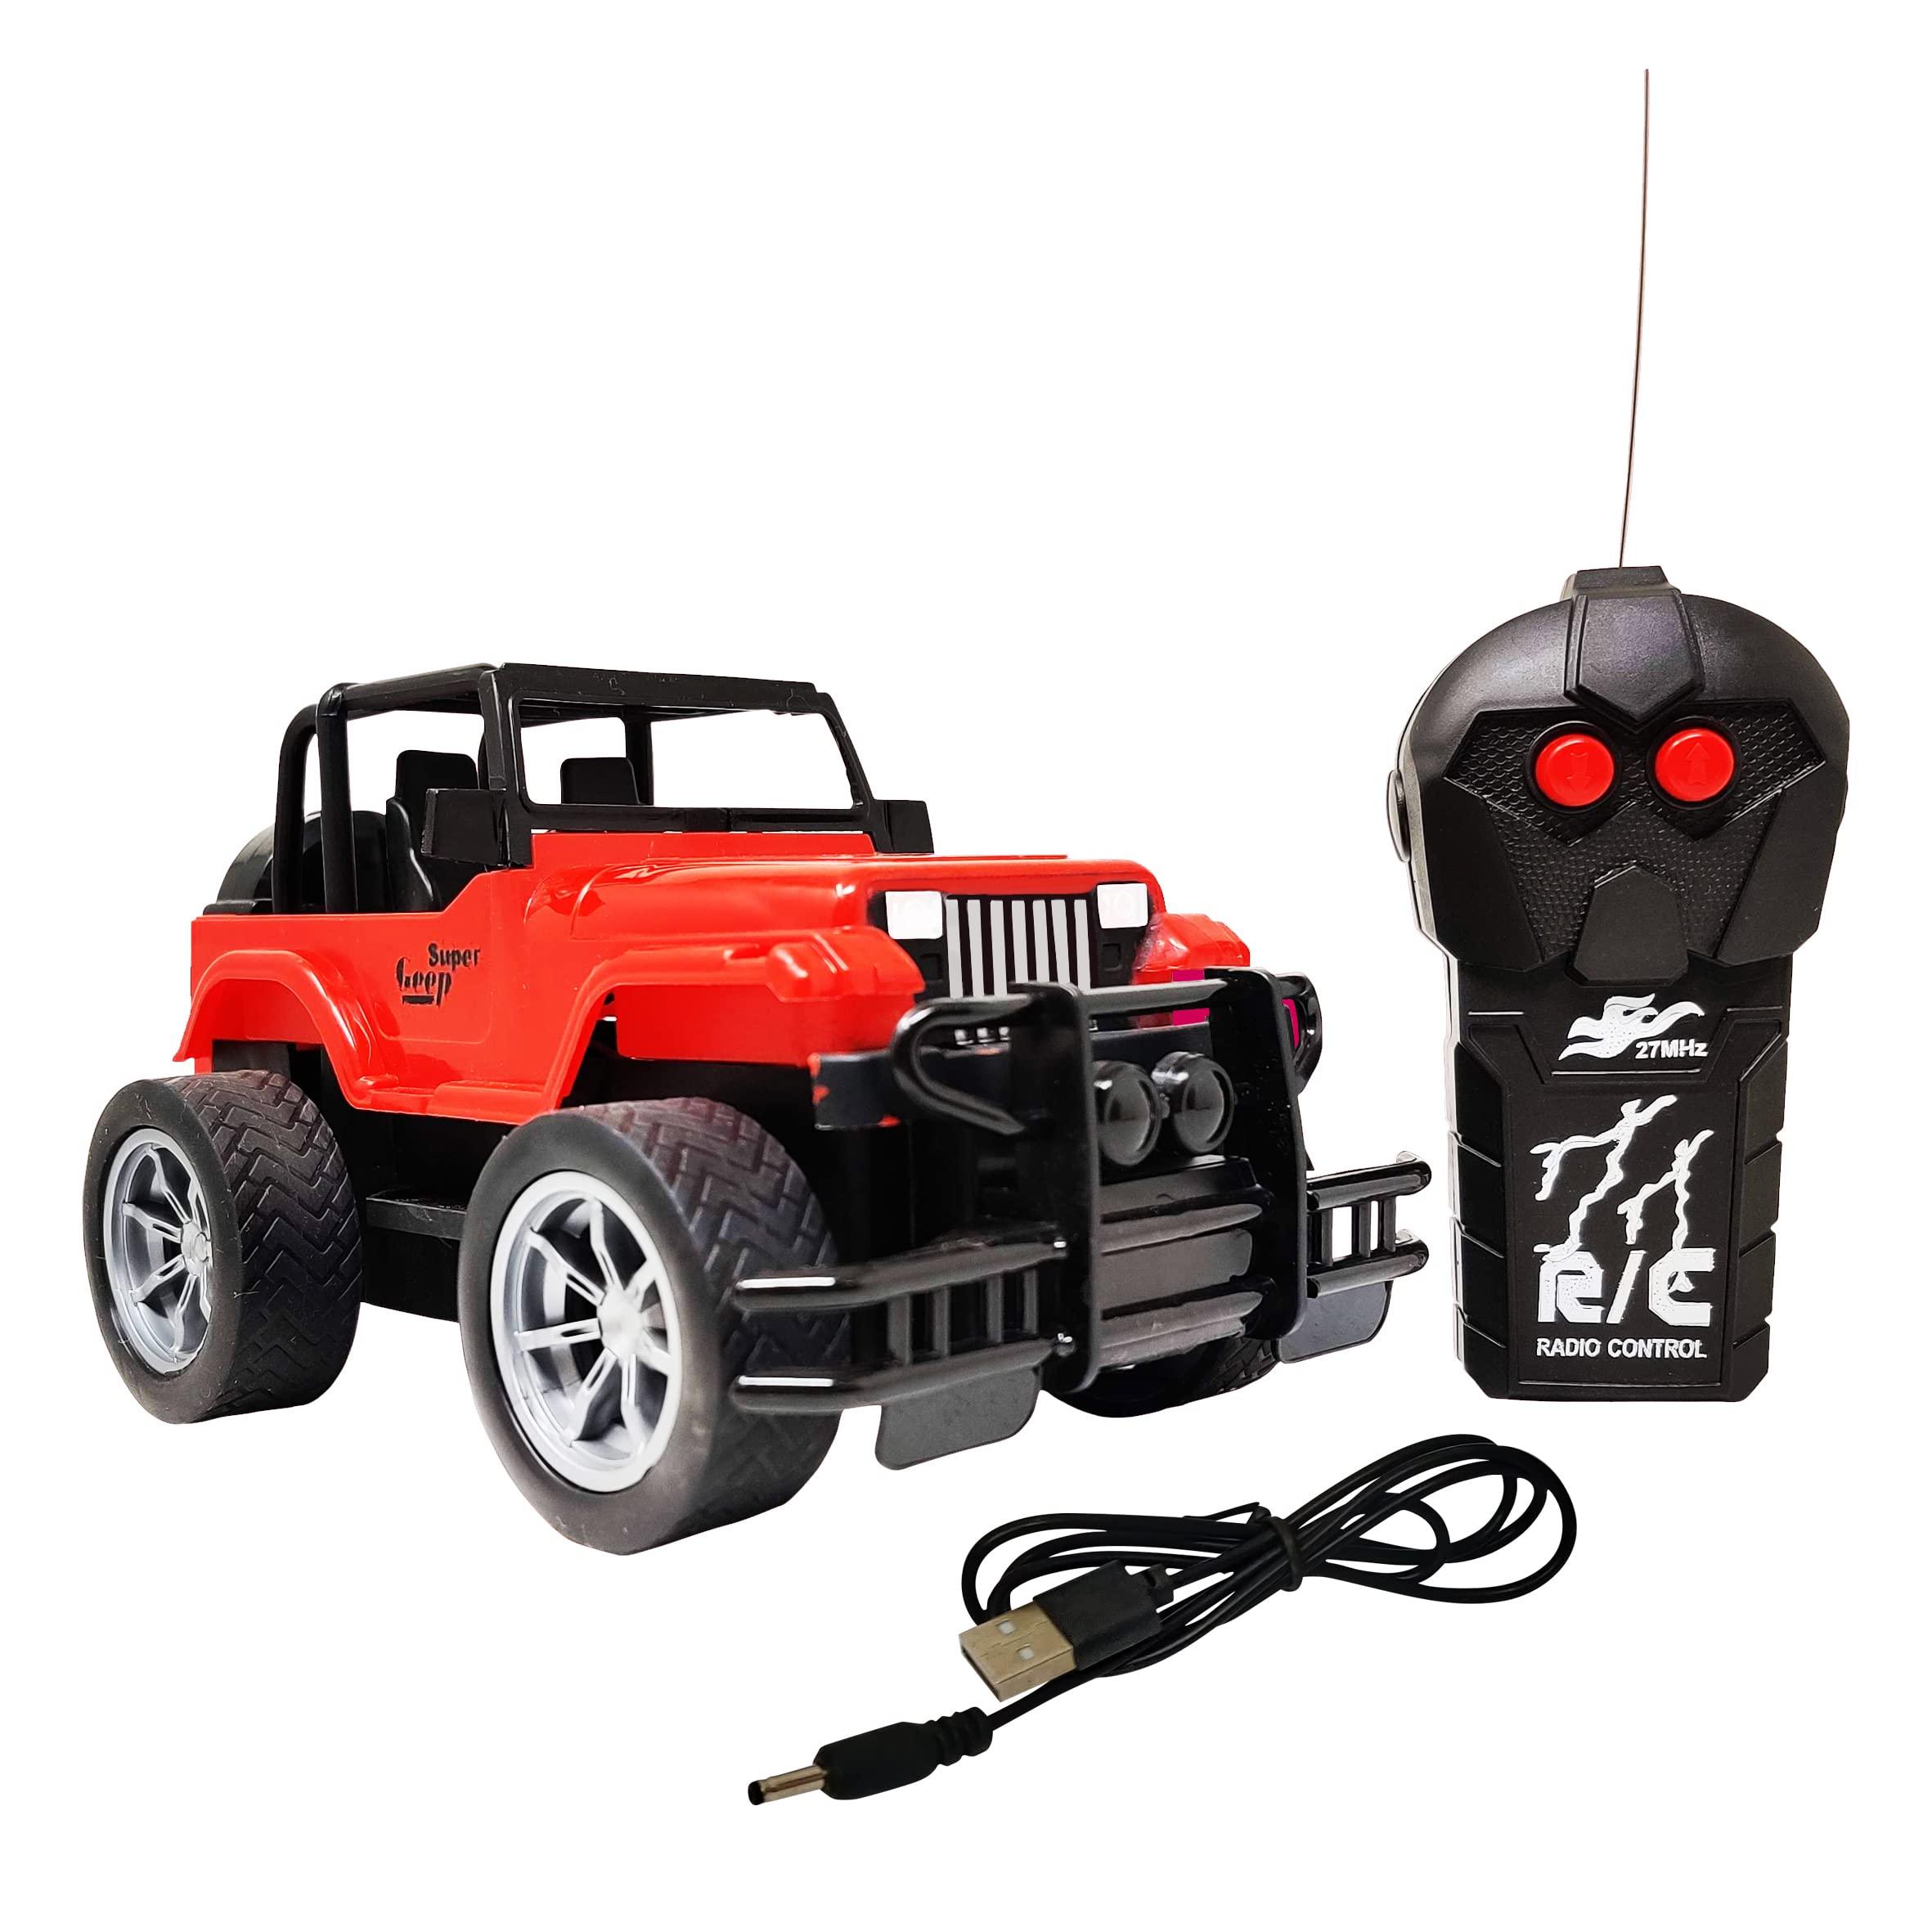 Jeep Remote Control Car: Top Jeep Remote Control Cars Available Now! 